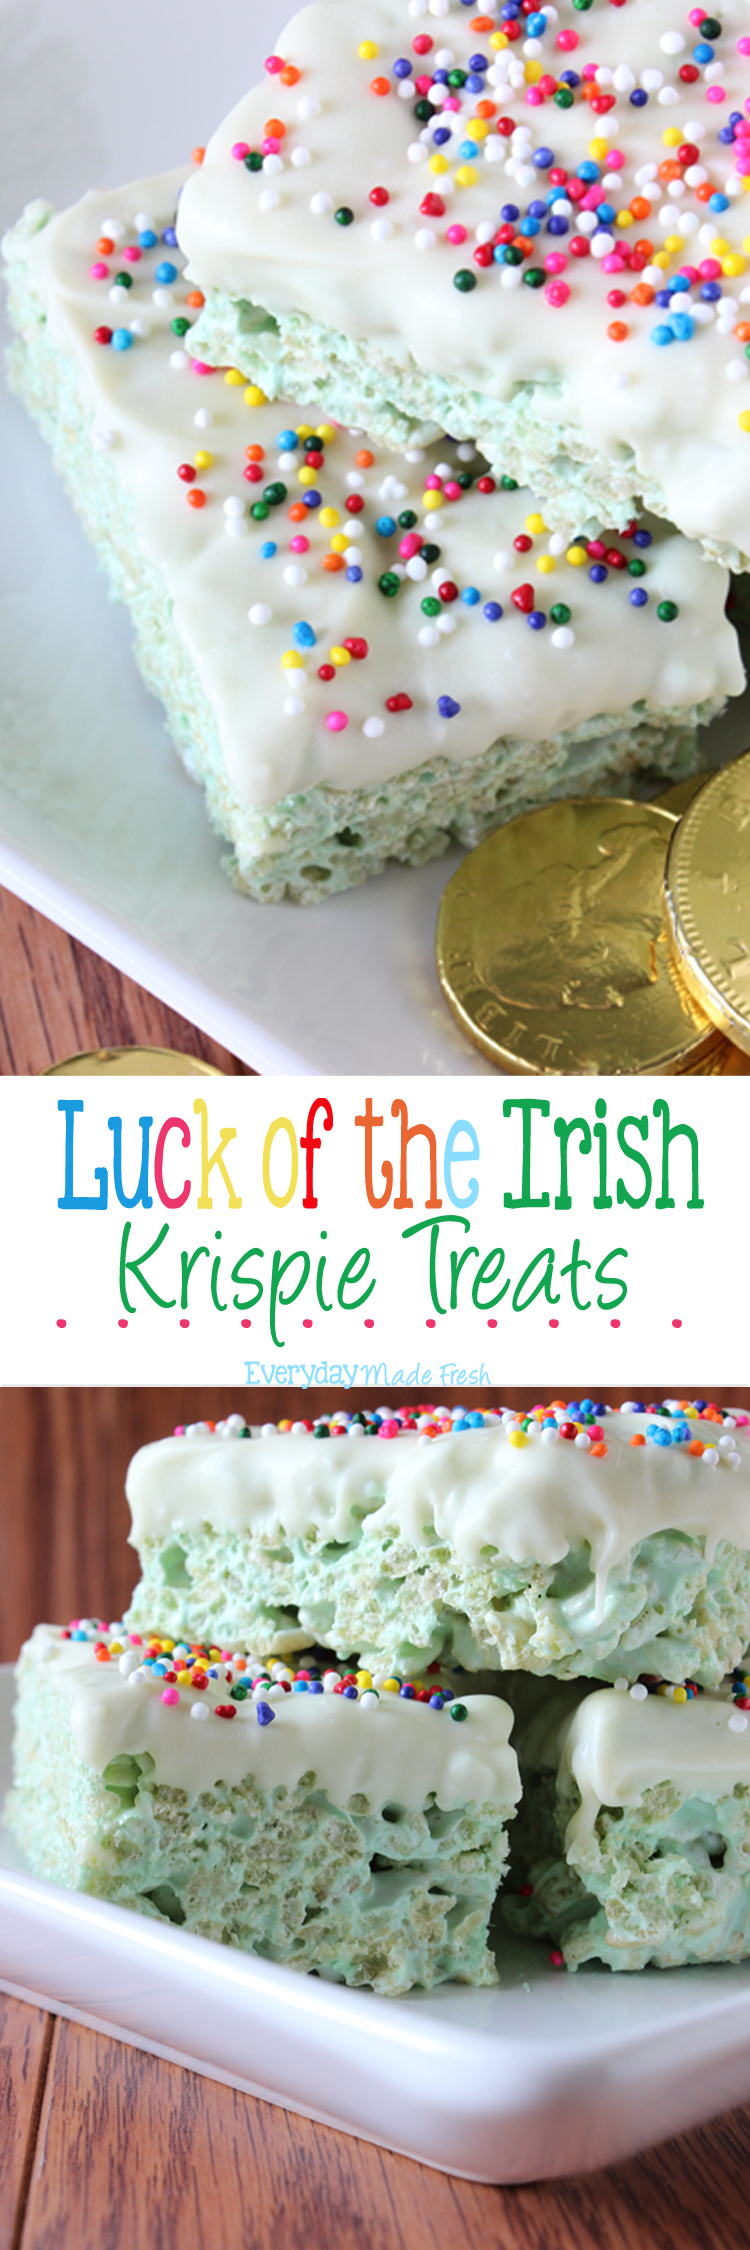 These Luck of the Irish Rice Krispie Treats are festive green and dipped in white chocolate with rainbow sprinkles! | OHMY-CREATIVE.COM via EverydayMadeFresh.com